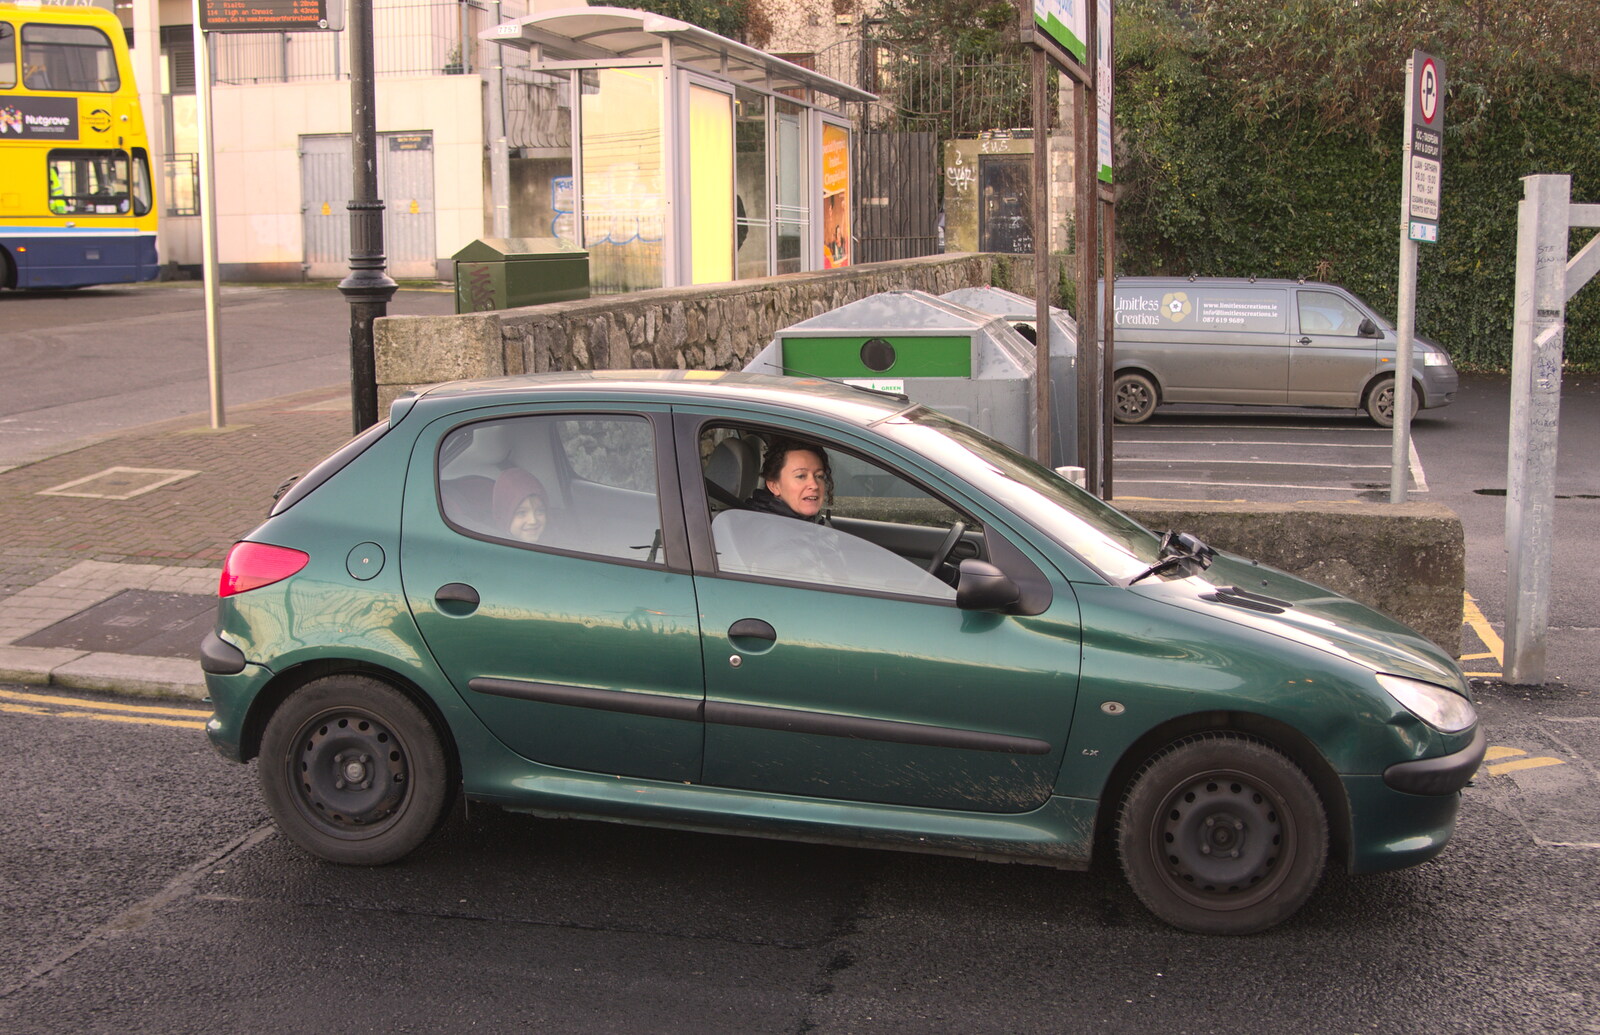 Evelyn drives up with Fred in tow from Christmas Eve in Dublin and Blackrock, Ireland - 24th December 2015